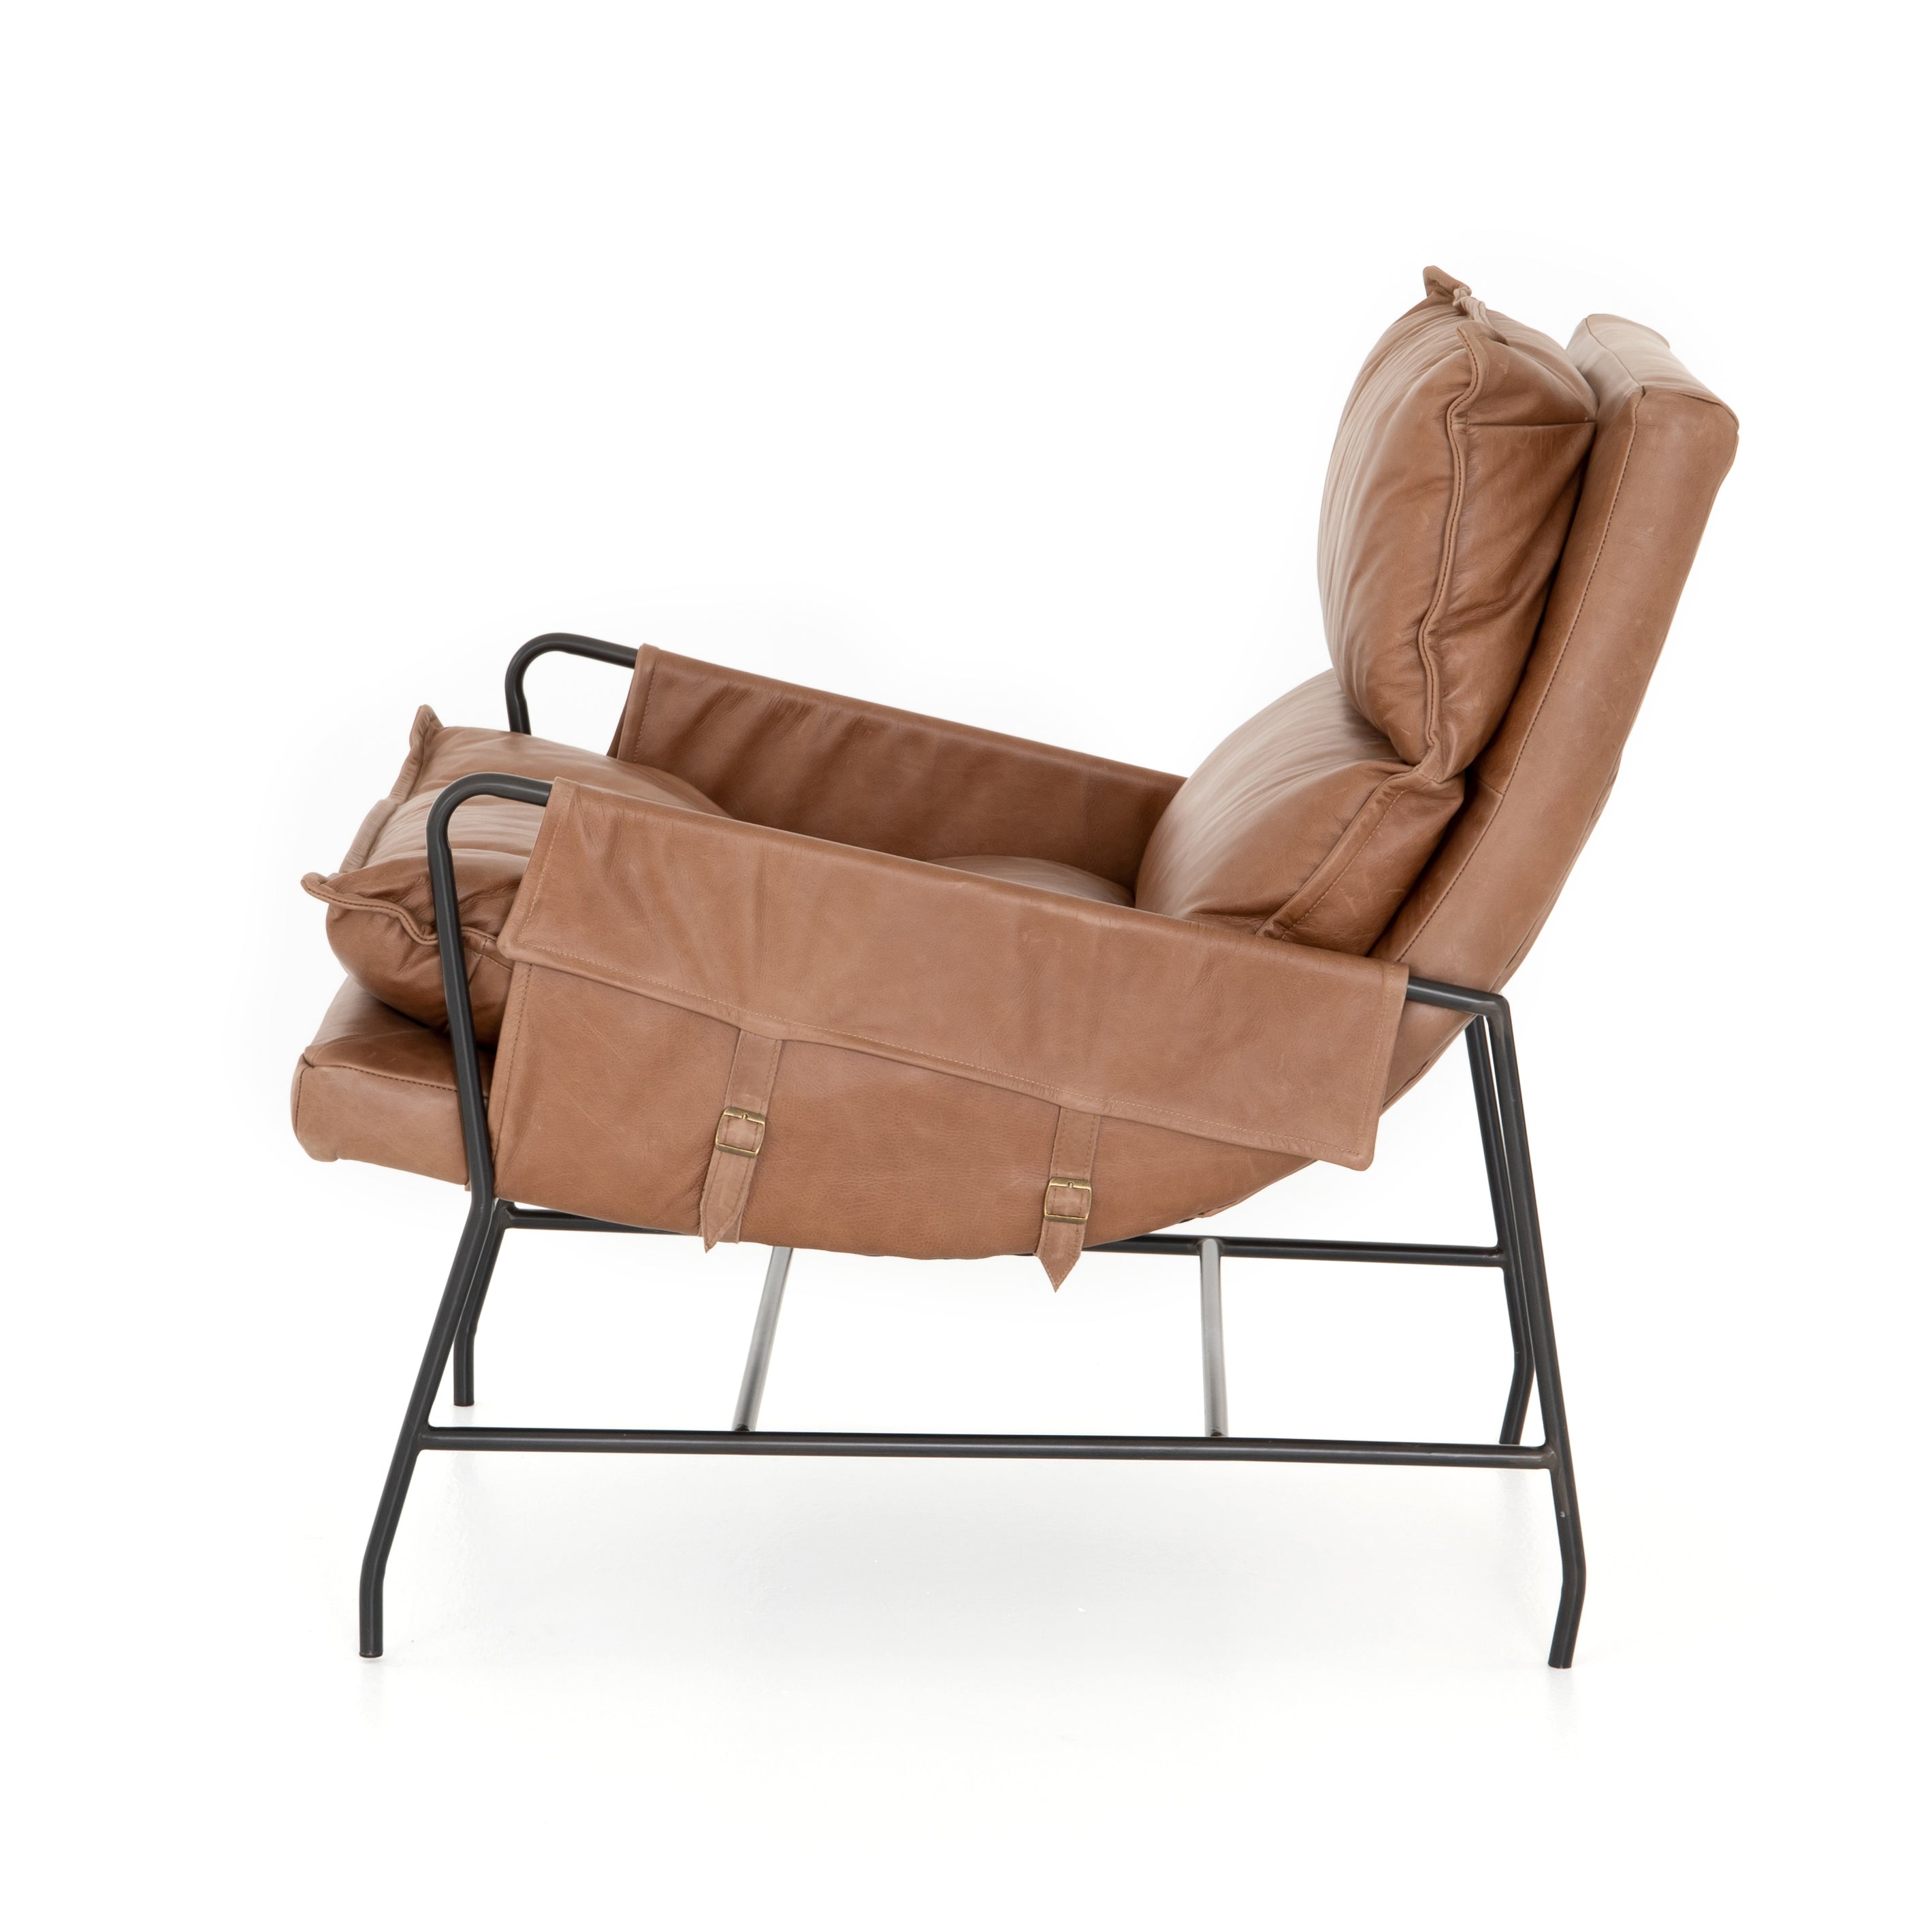 A nod to relaxed modernism, playing up the natural depth of exclusive top-grain leather, with buckle details and low-slung styling crafting the hippest of vibes.  Overall Dimensions: 28.00"w x 37.00"d x 35.00"h Seat Depth: 22" Seat Height: 20" Arm Height from Floor: 23.5" Arm Height from Seat: 3.5"  Colors: Waxed Ebony, Chaps Saddle Materials: Iron, Top Grain Leather